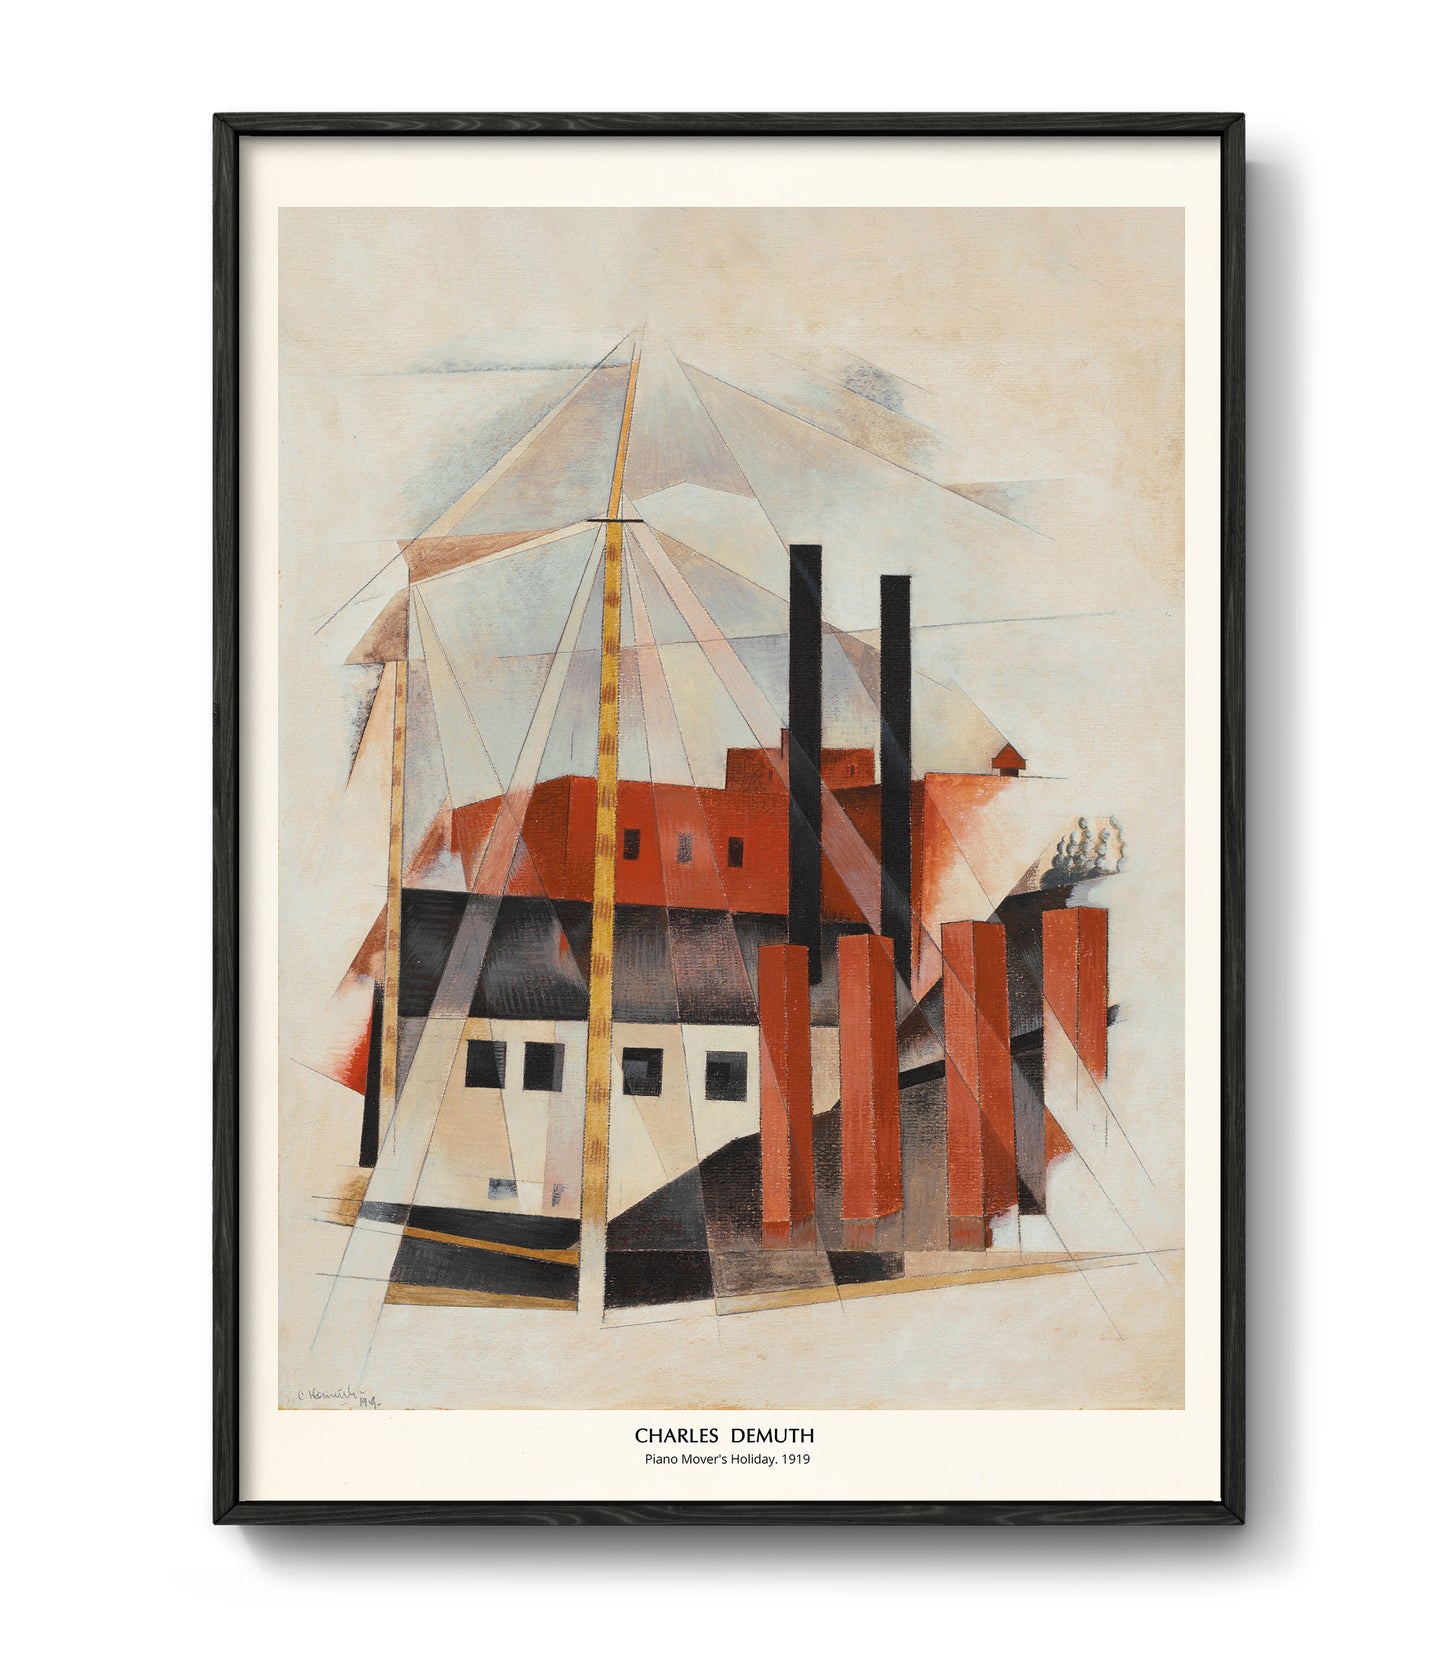 Piano Mover's Holiday by Charles Demuth, 1919